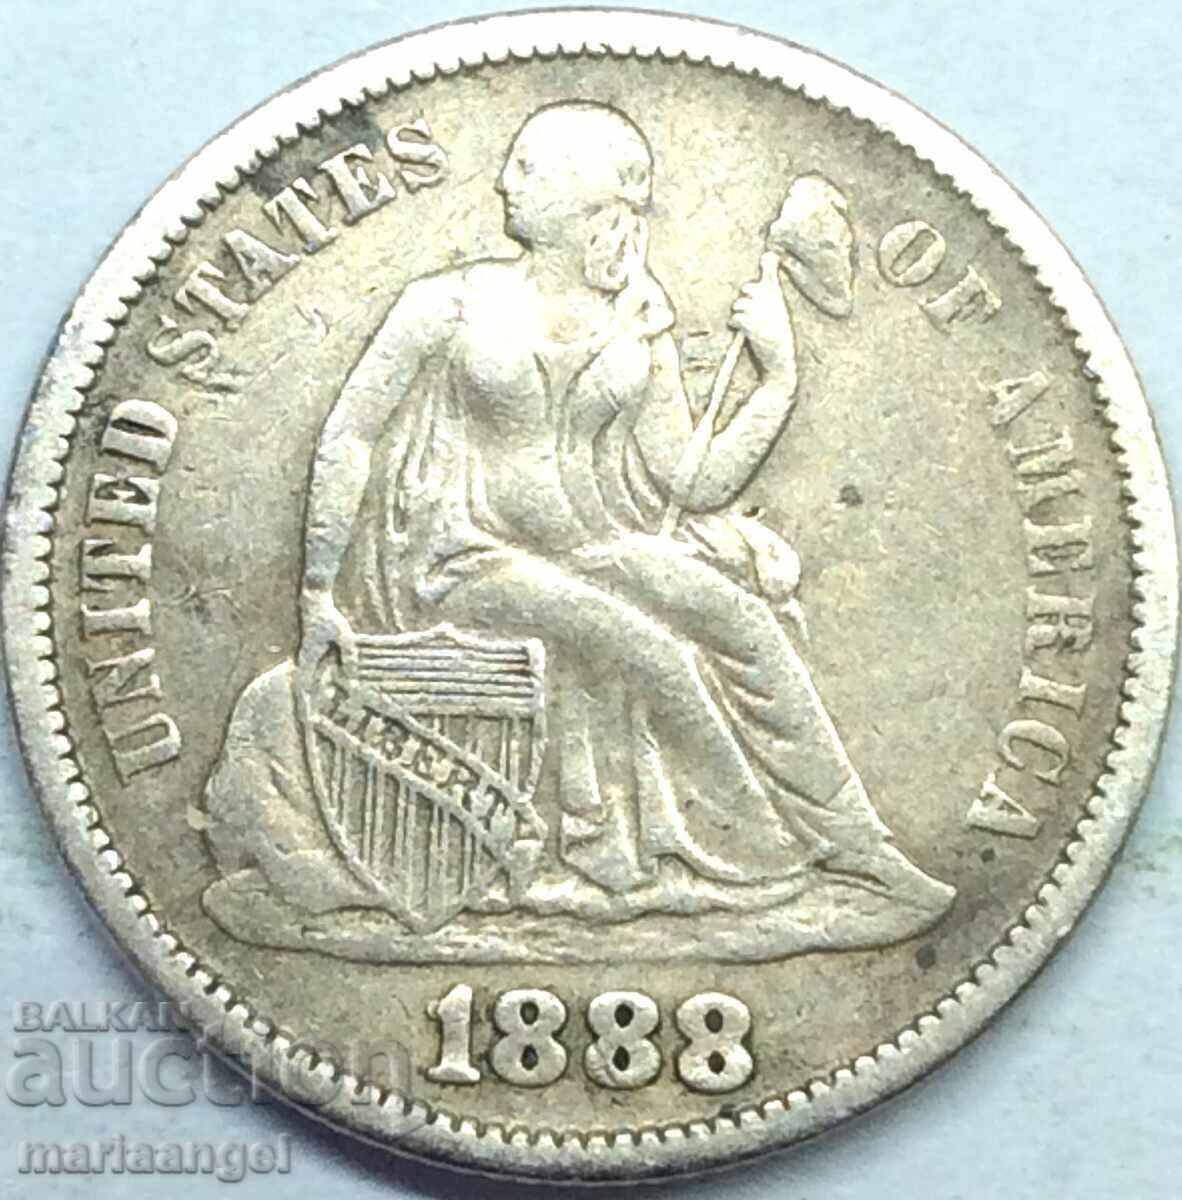 USA 1888 1 dime 10 cents Seated Liberty silver